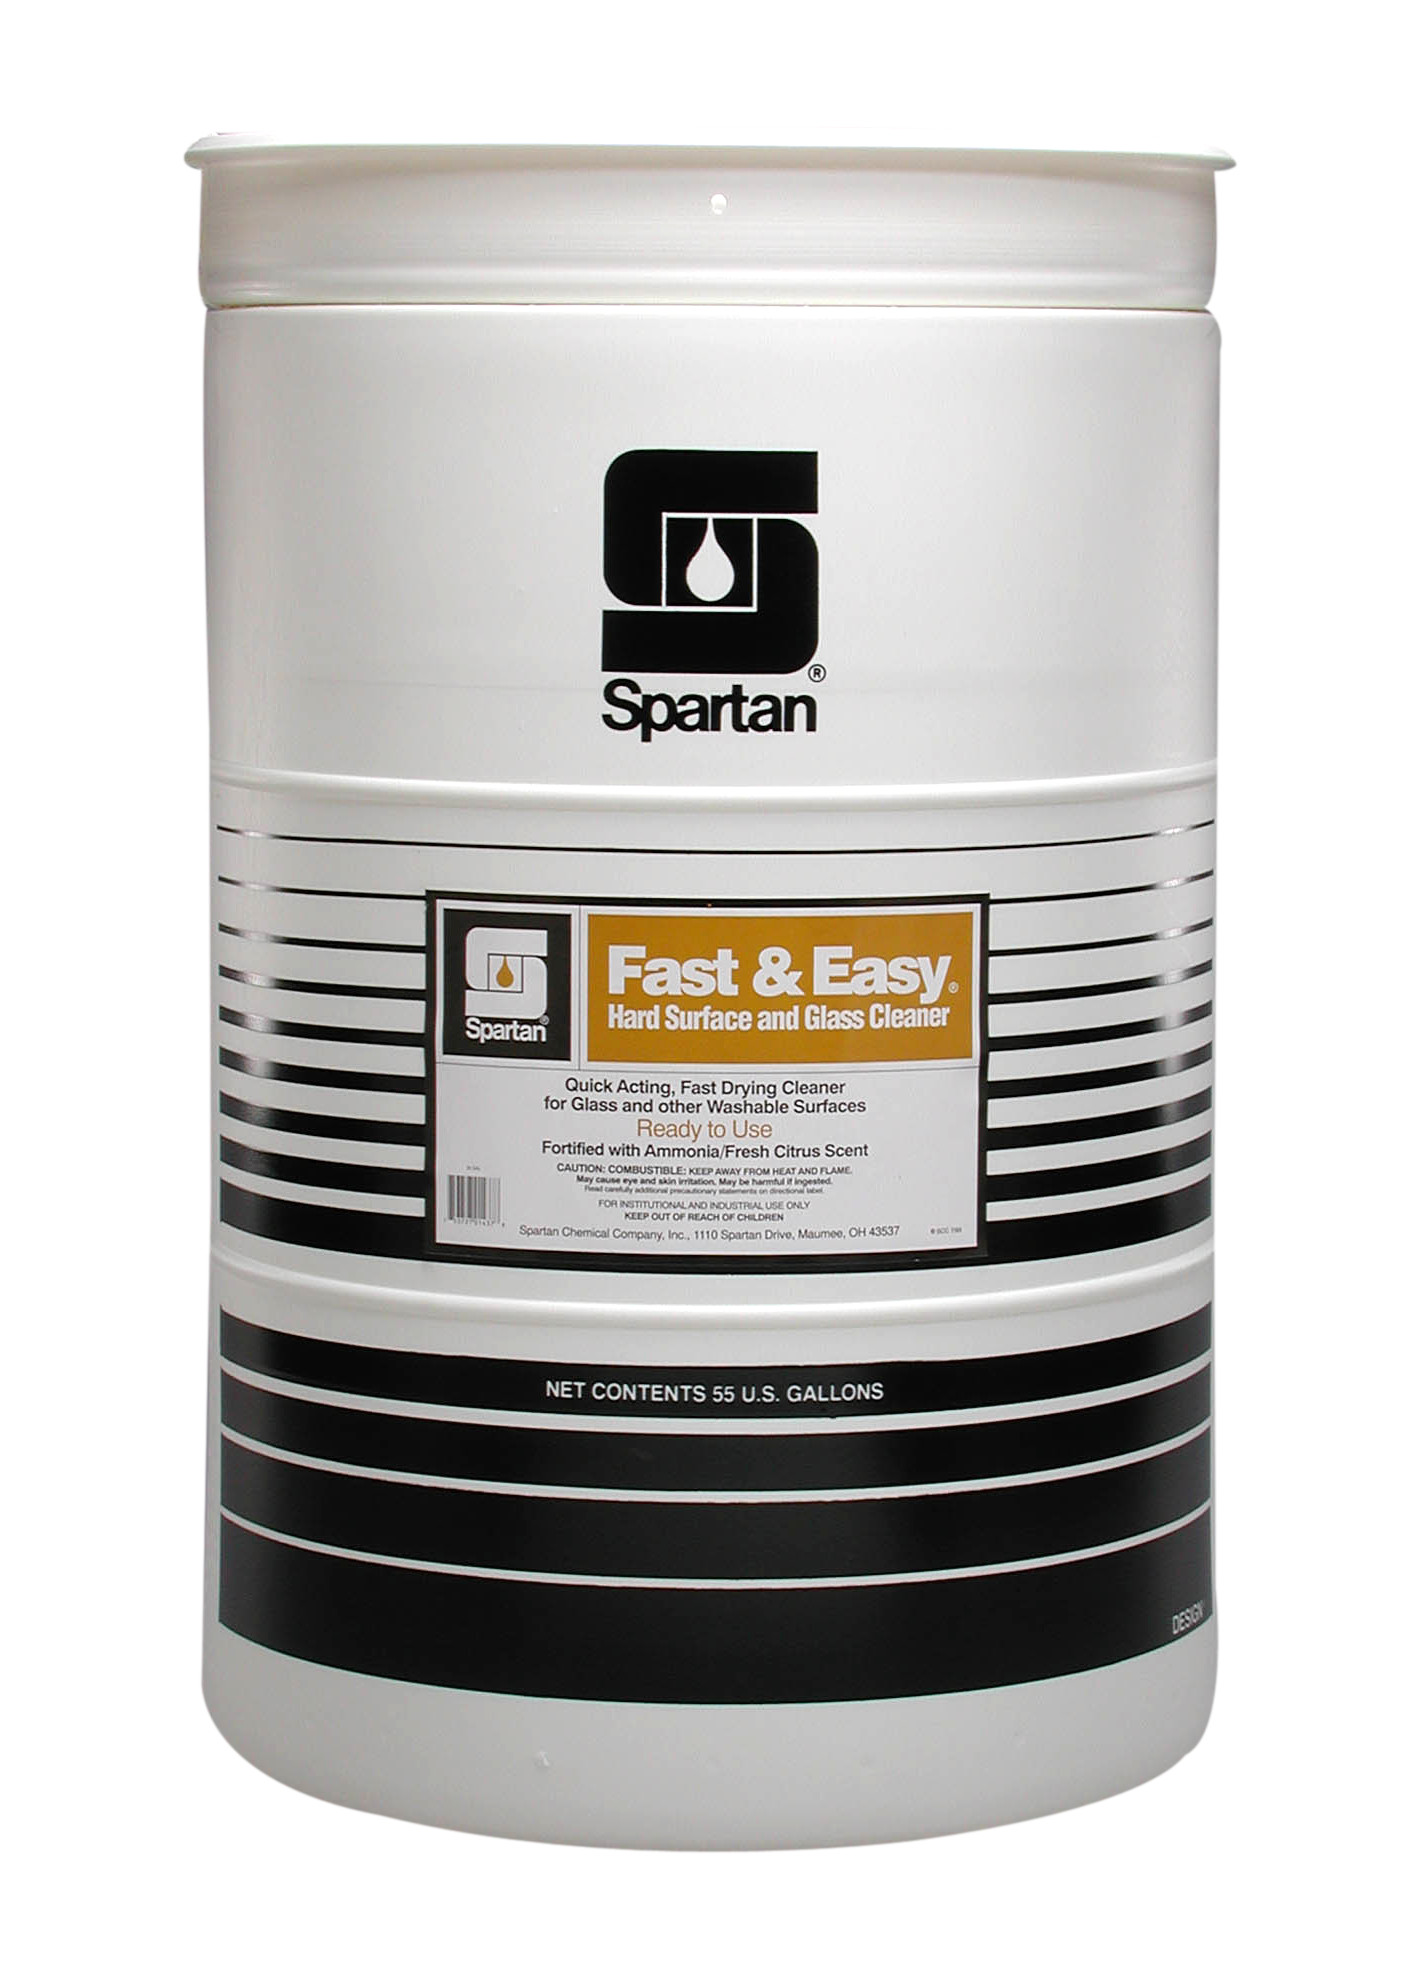 Spartan Chemical Company Fast & Easy, 55 GAL DRUM